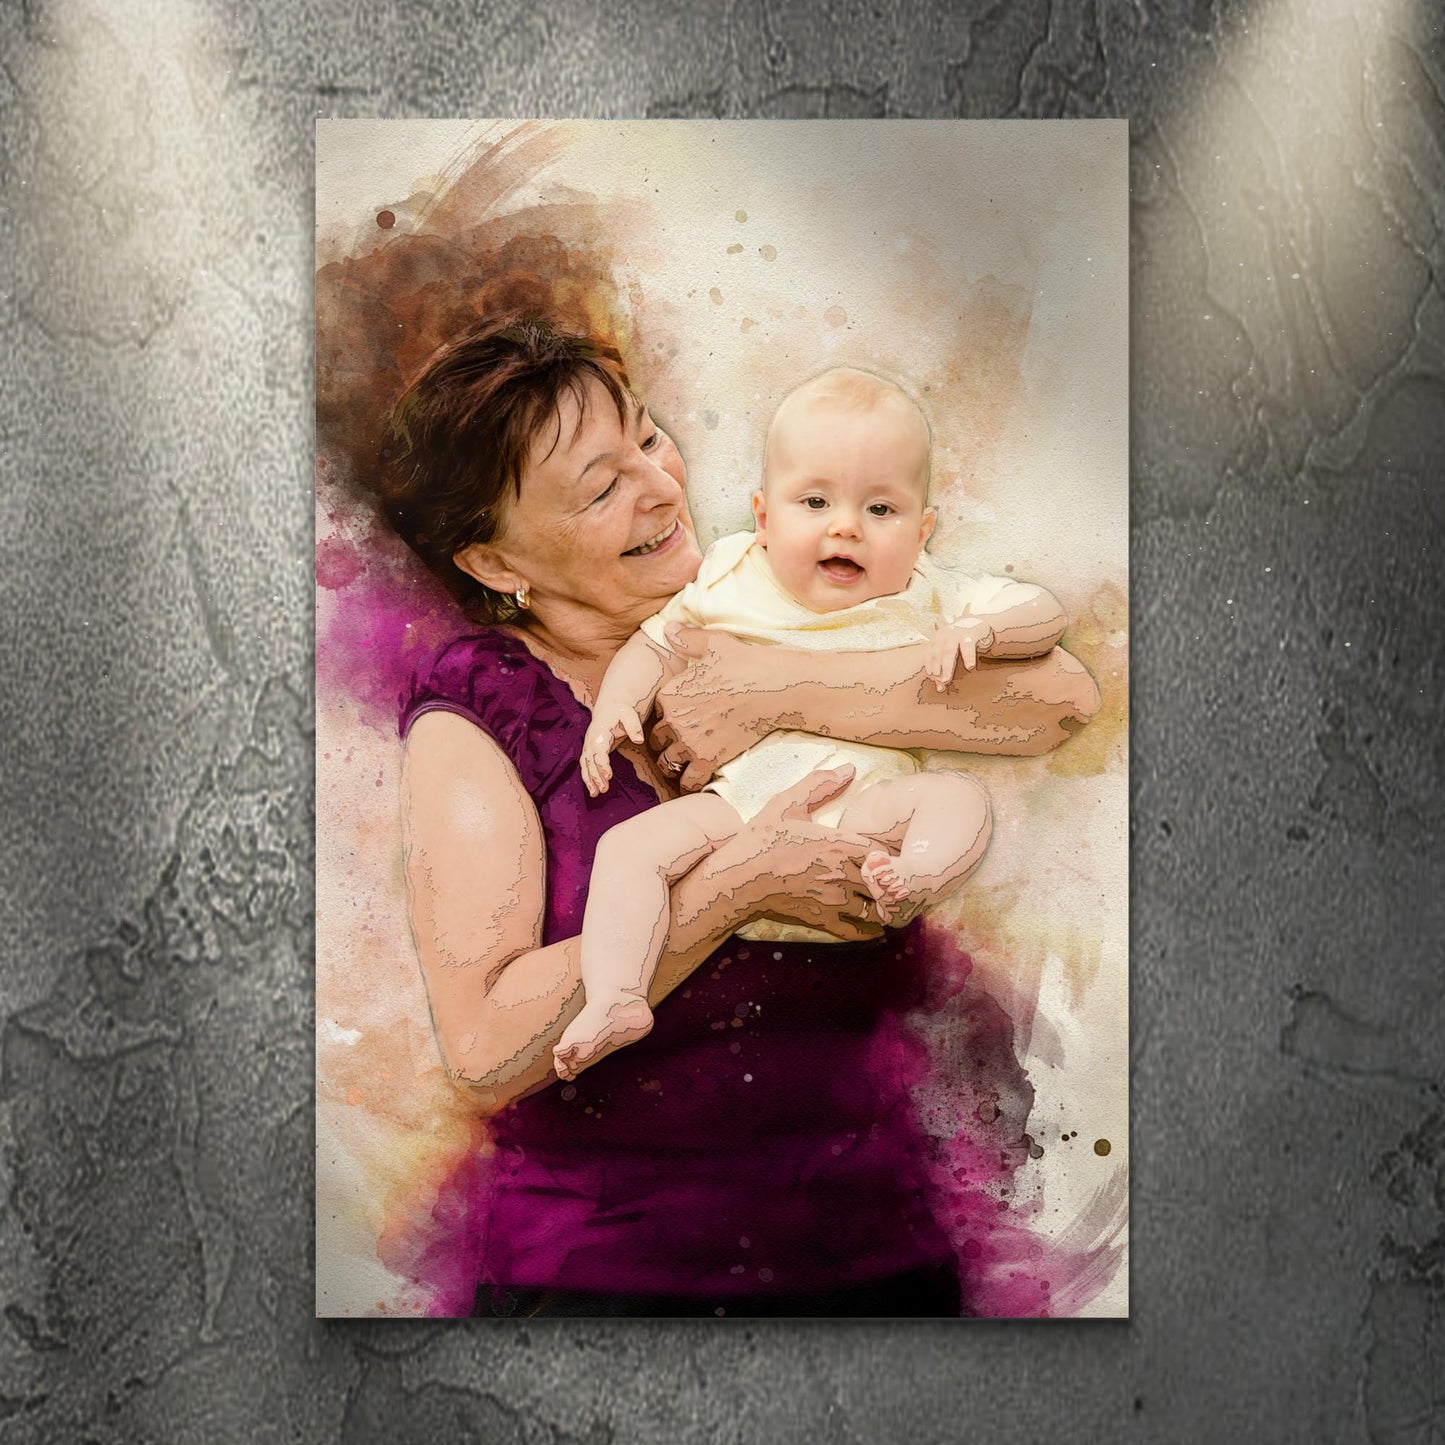 Grandma And Grandchild Watercolor Portrait Sign - Image by Tailored Canvases